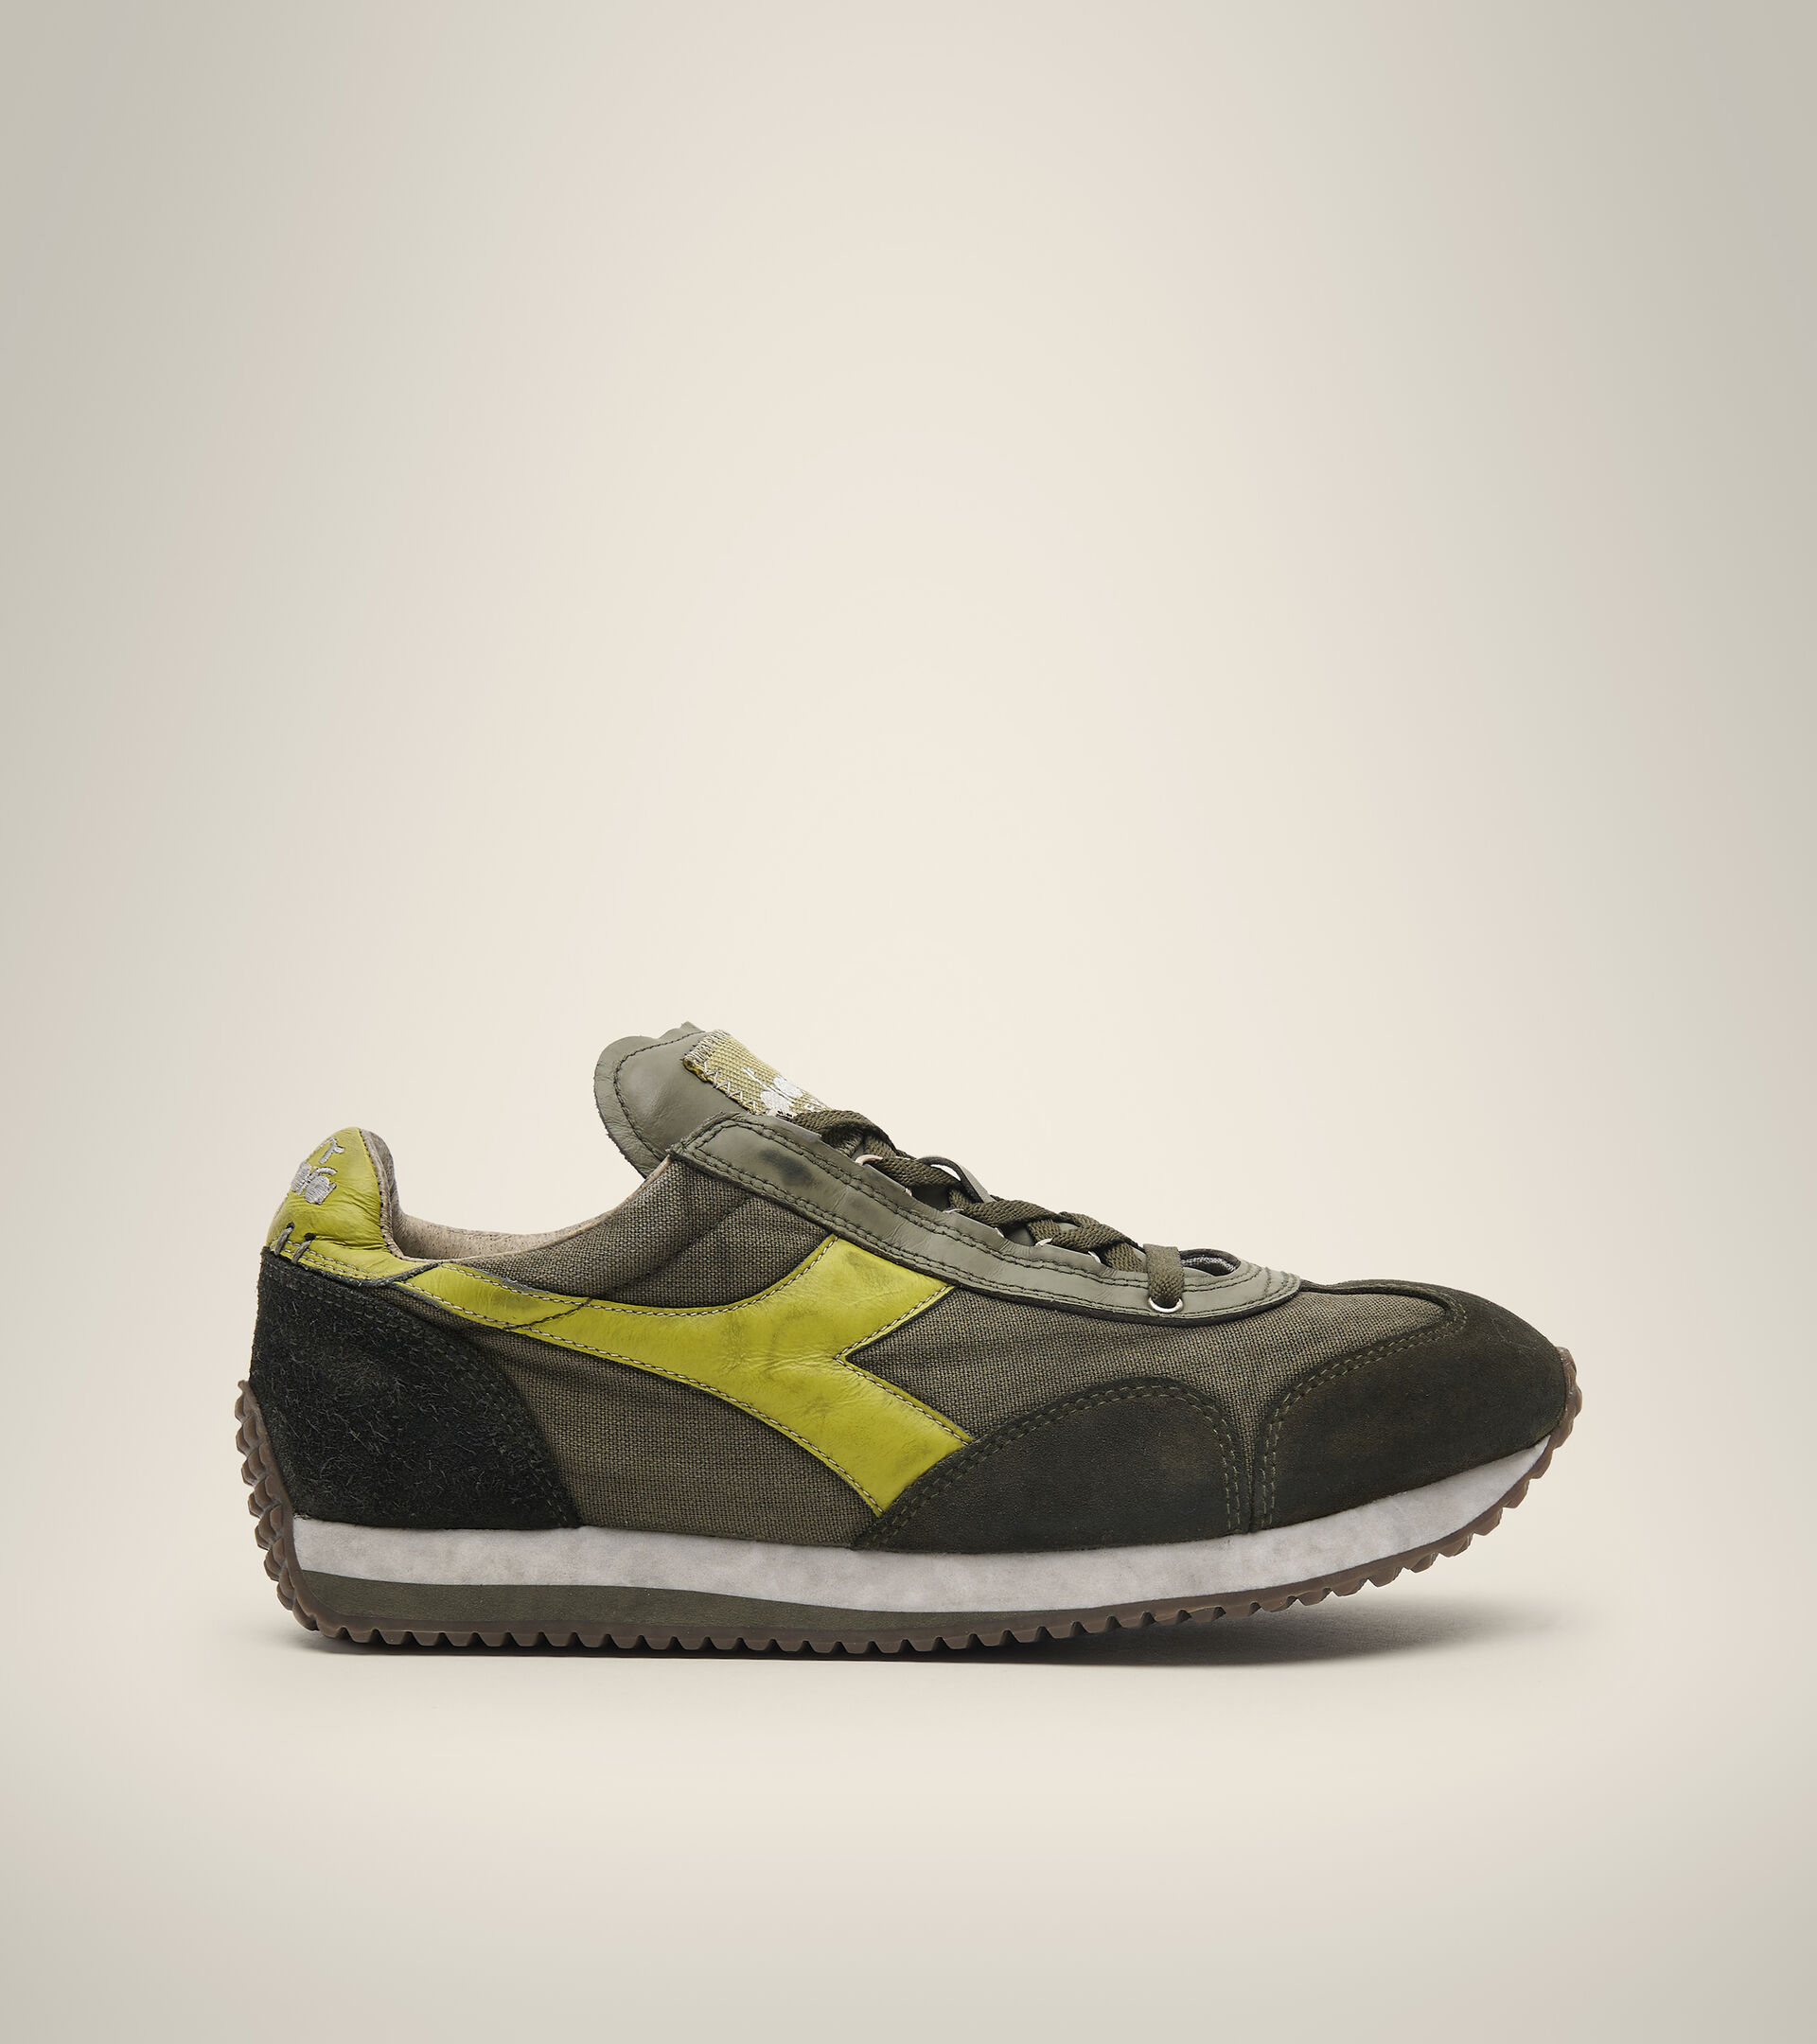 Chaussures Heritage - Unisexe EQUIPE H DIRTY STONE WASH EVO VERT OLIVE BRULE/OLIVE NUIT - Diadora